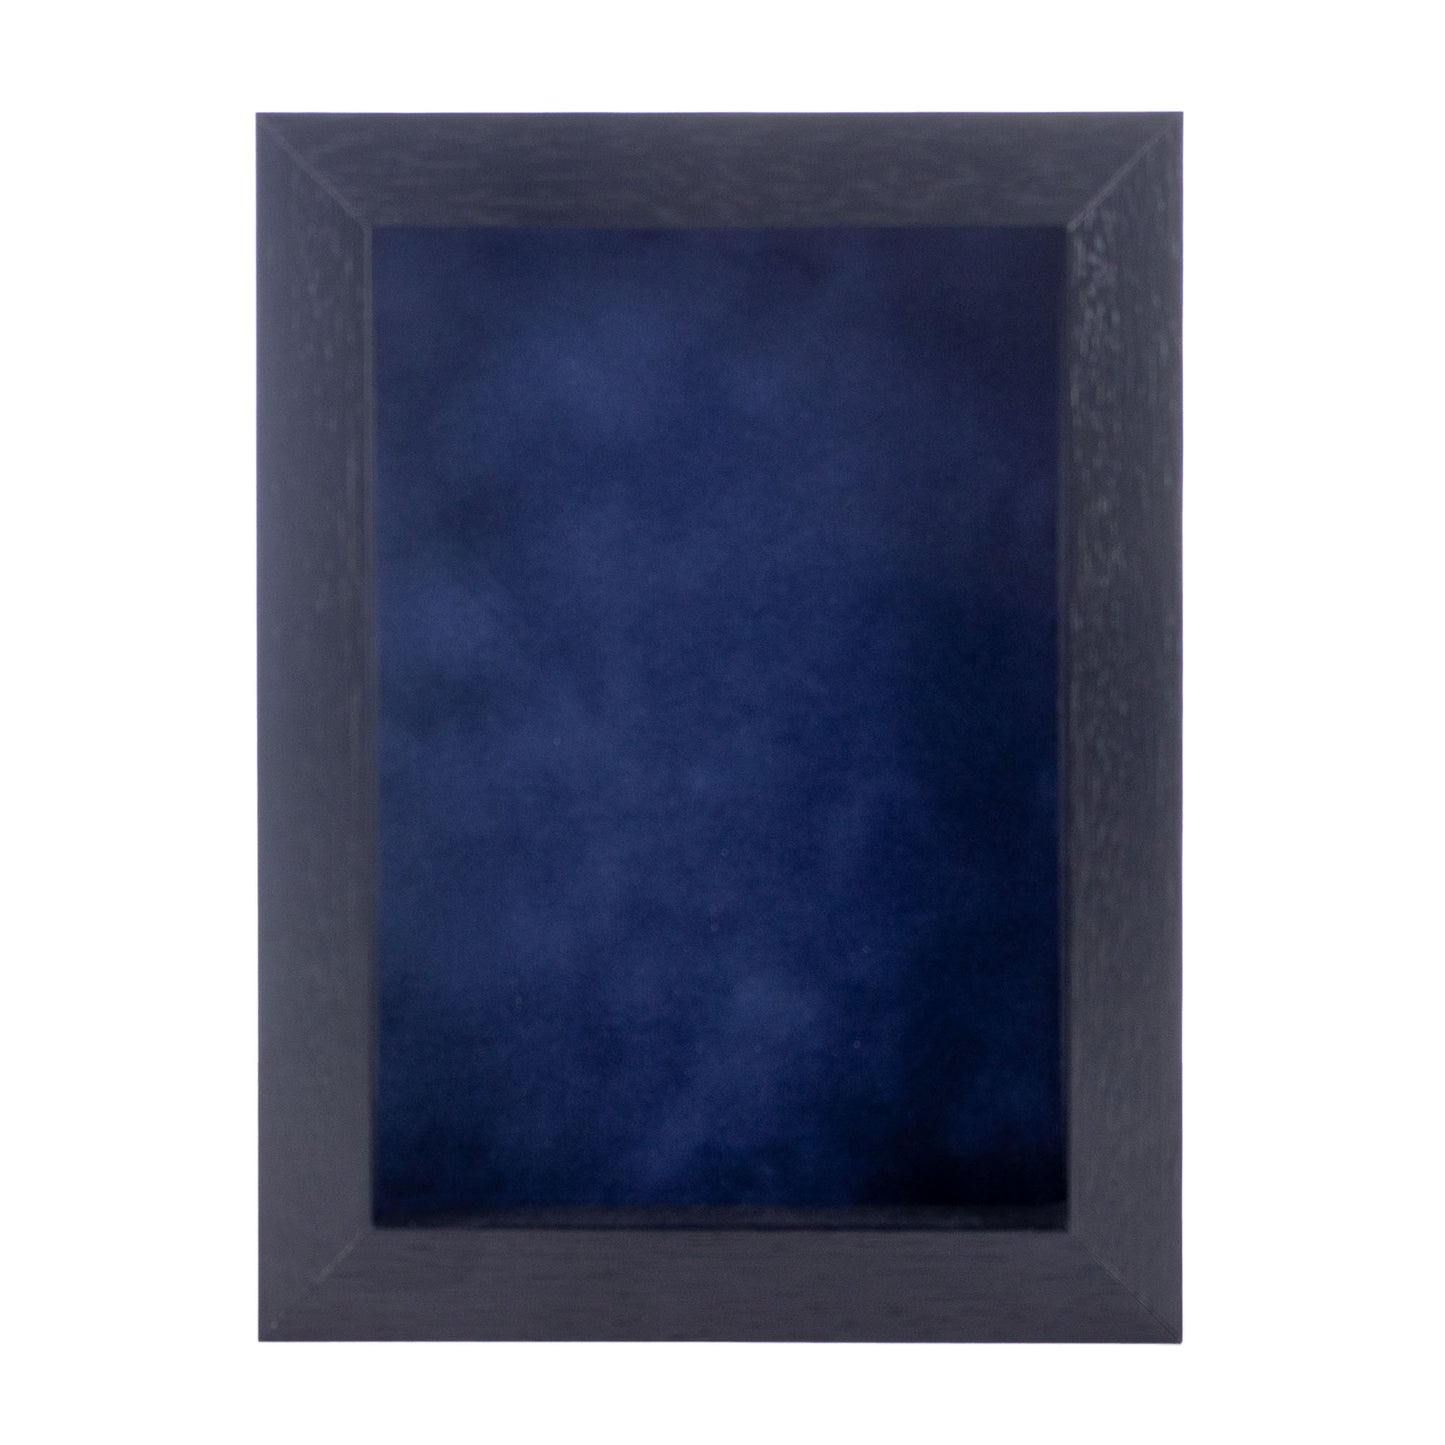 Textured Black Shadow Box Frame With Navy Blue Acid-Free Suede Backing